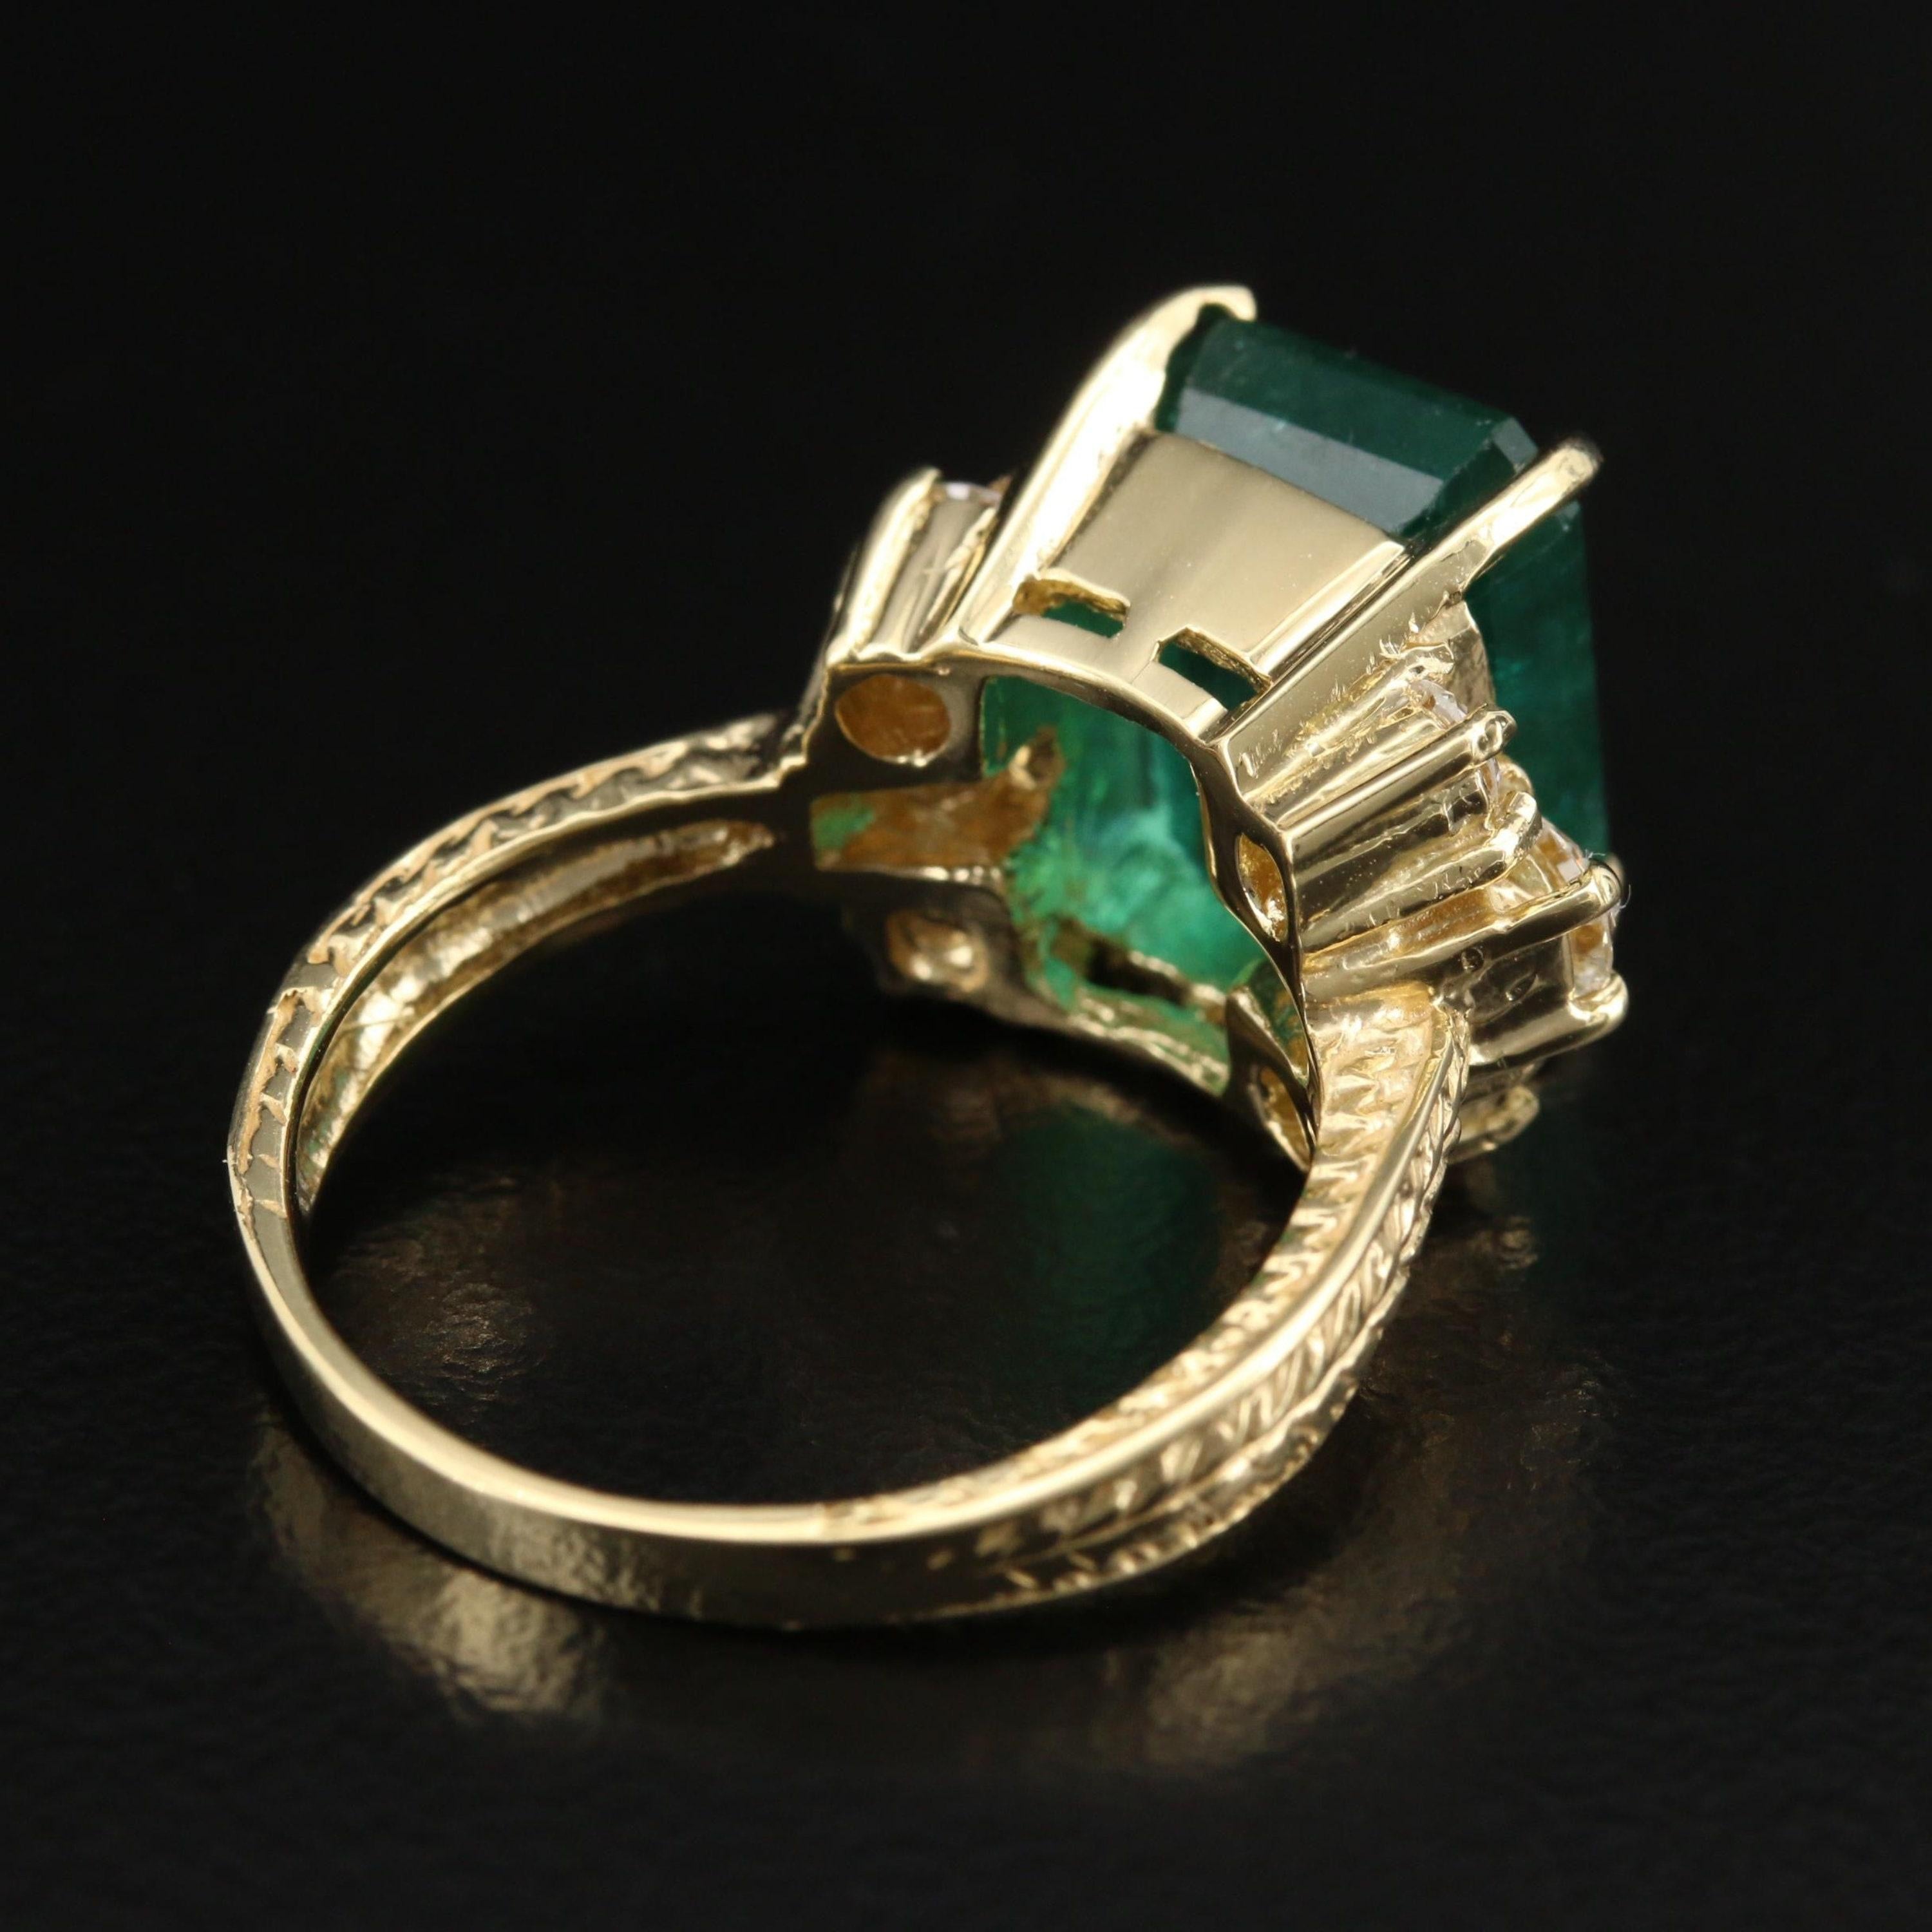 For Sale:  4 Carat Natural Emerald Diamond Engagement Ring Set in 18K Gold, Cocktail Ring 4